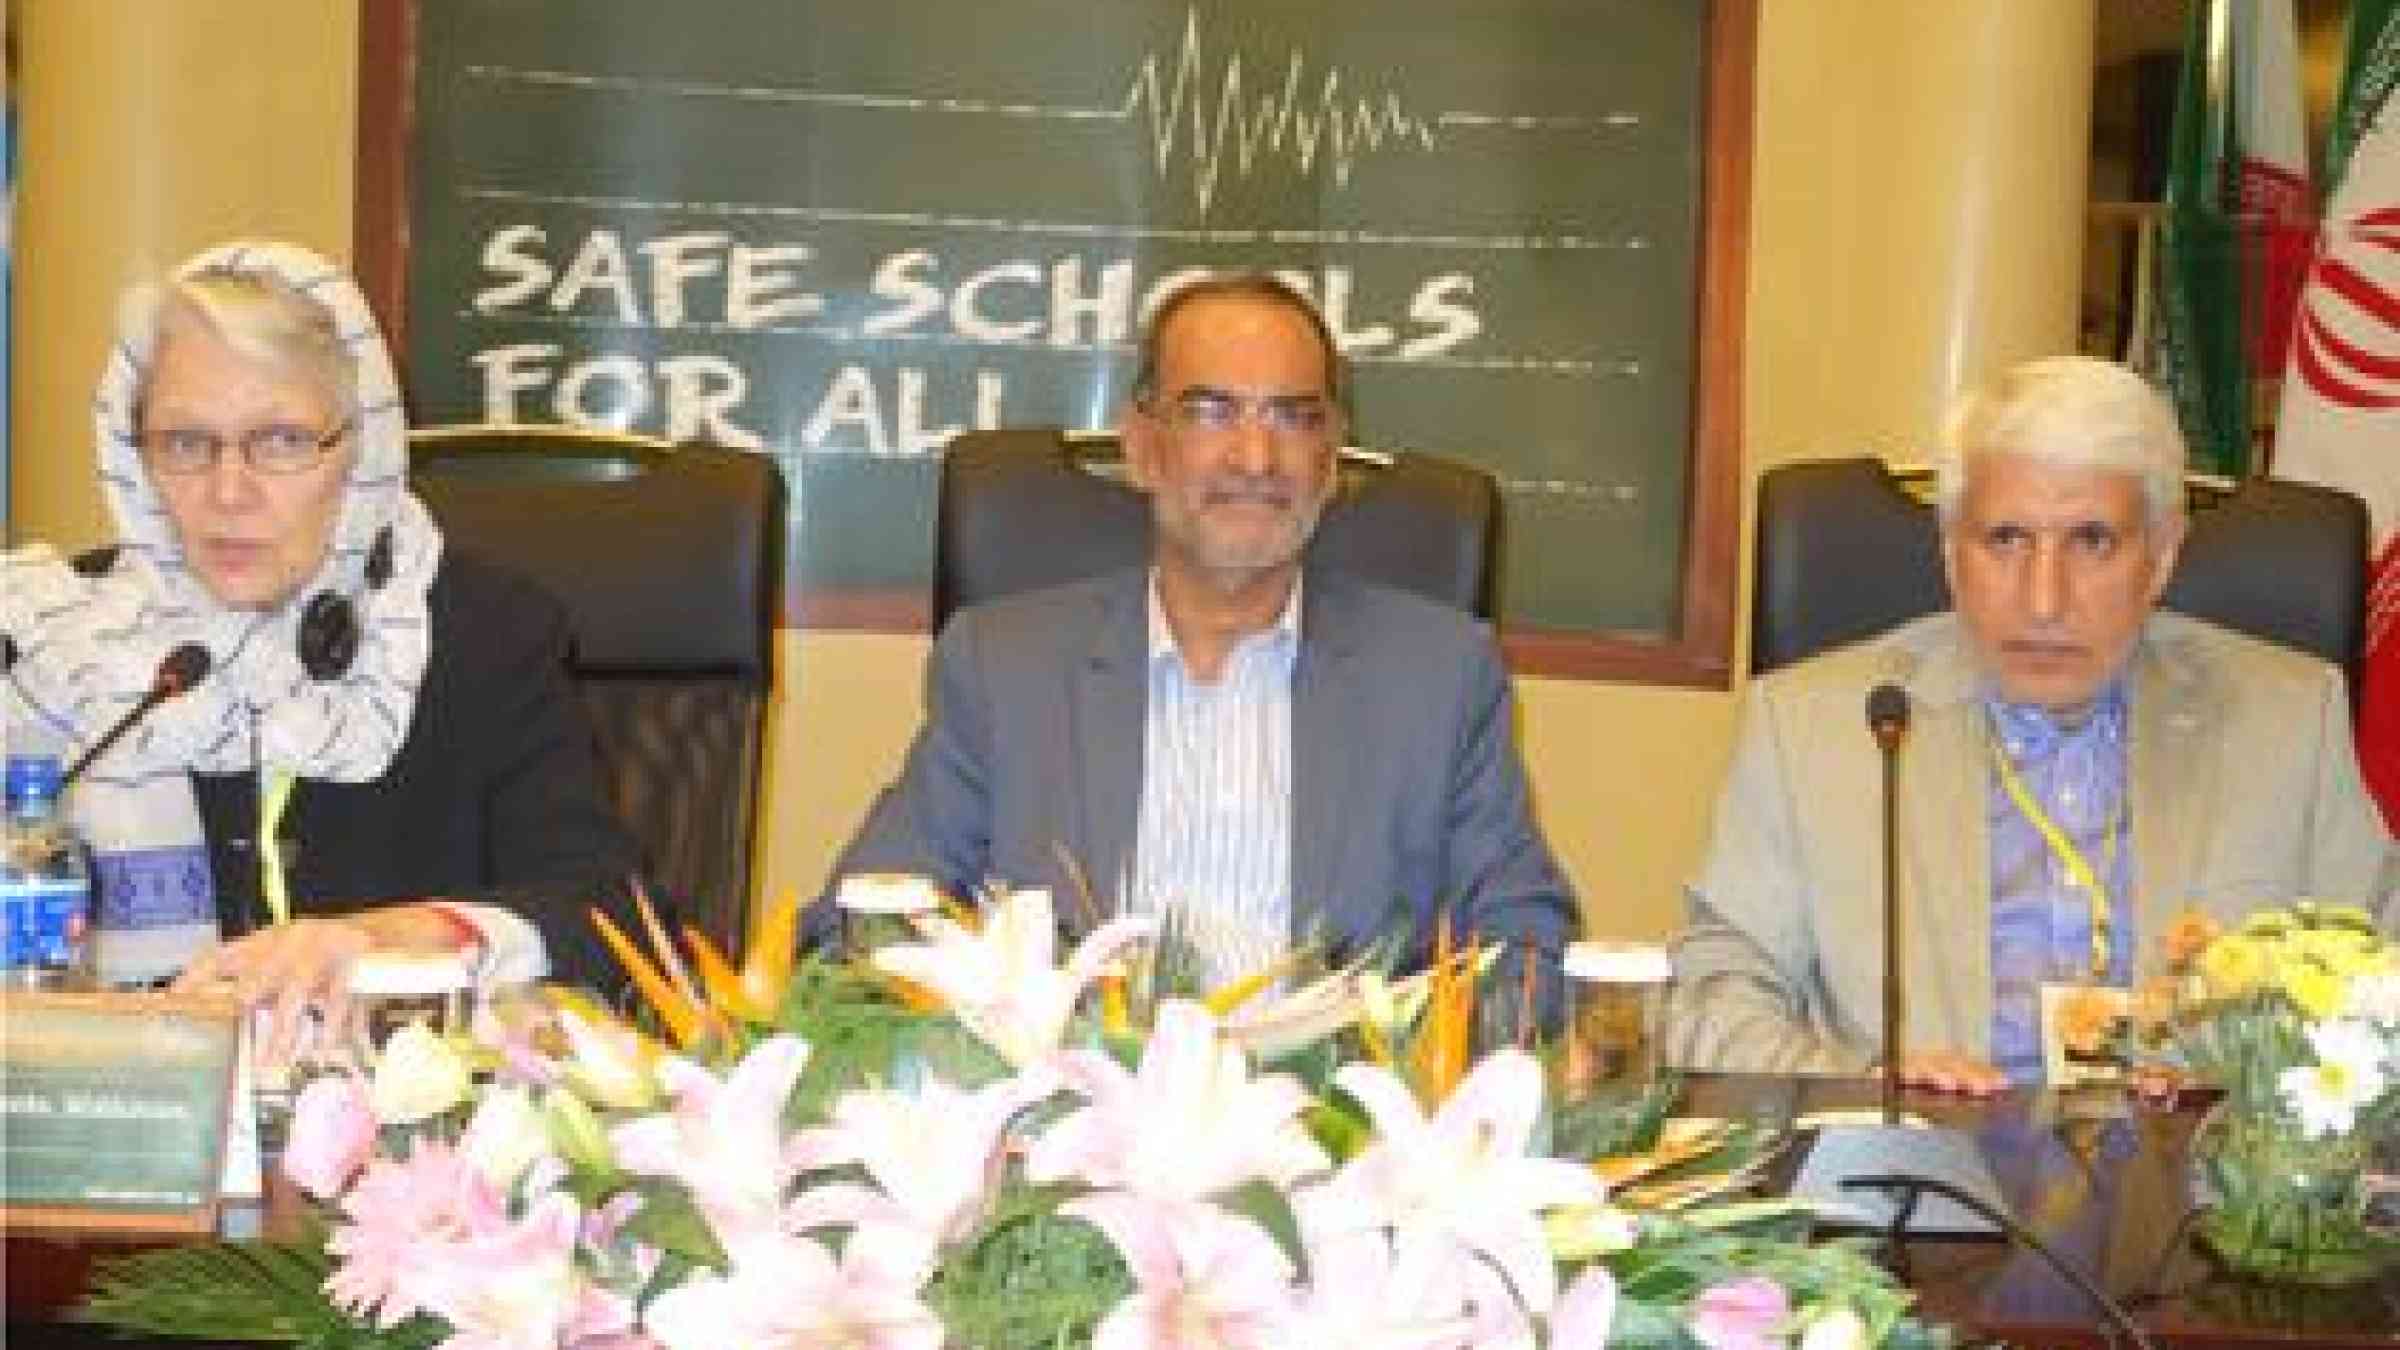 Ms. Margareta Wahlstrom, head of UNISDR, Dr. Morteza Raissi Dehkordi, Deputy Minister for Education, Iran, and Prof. Mohsen Ghafory-Ashtiany of the International Institute of Earthquake Engineering and Seismology at the opening day of the Safe School Leaders meeting in Tehran. (Photo: UNISDR)